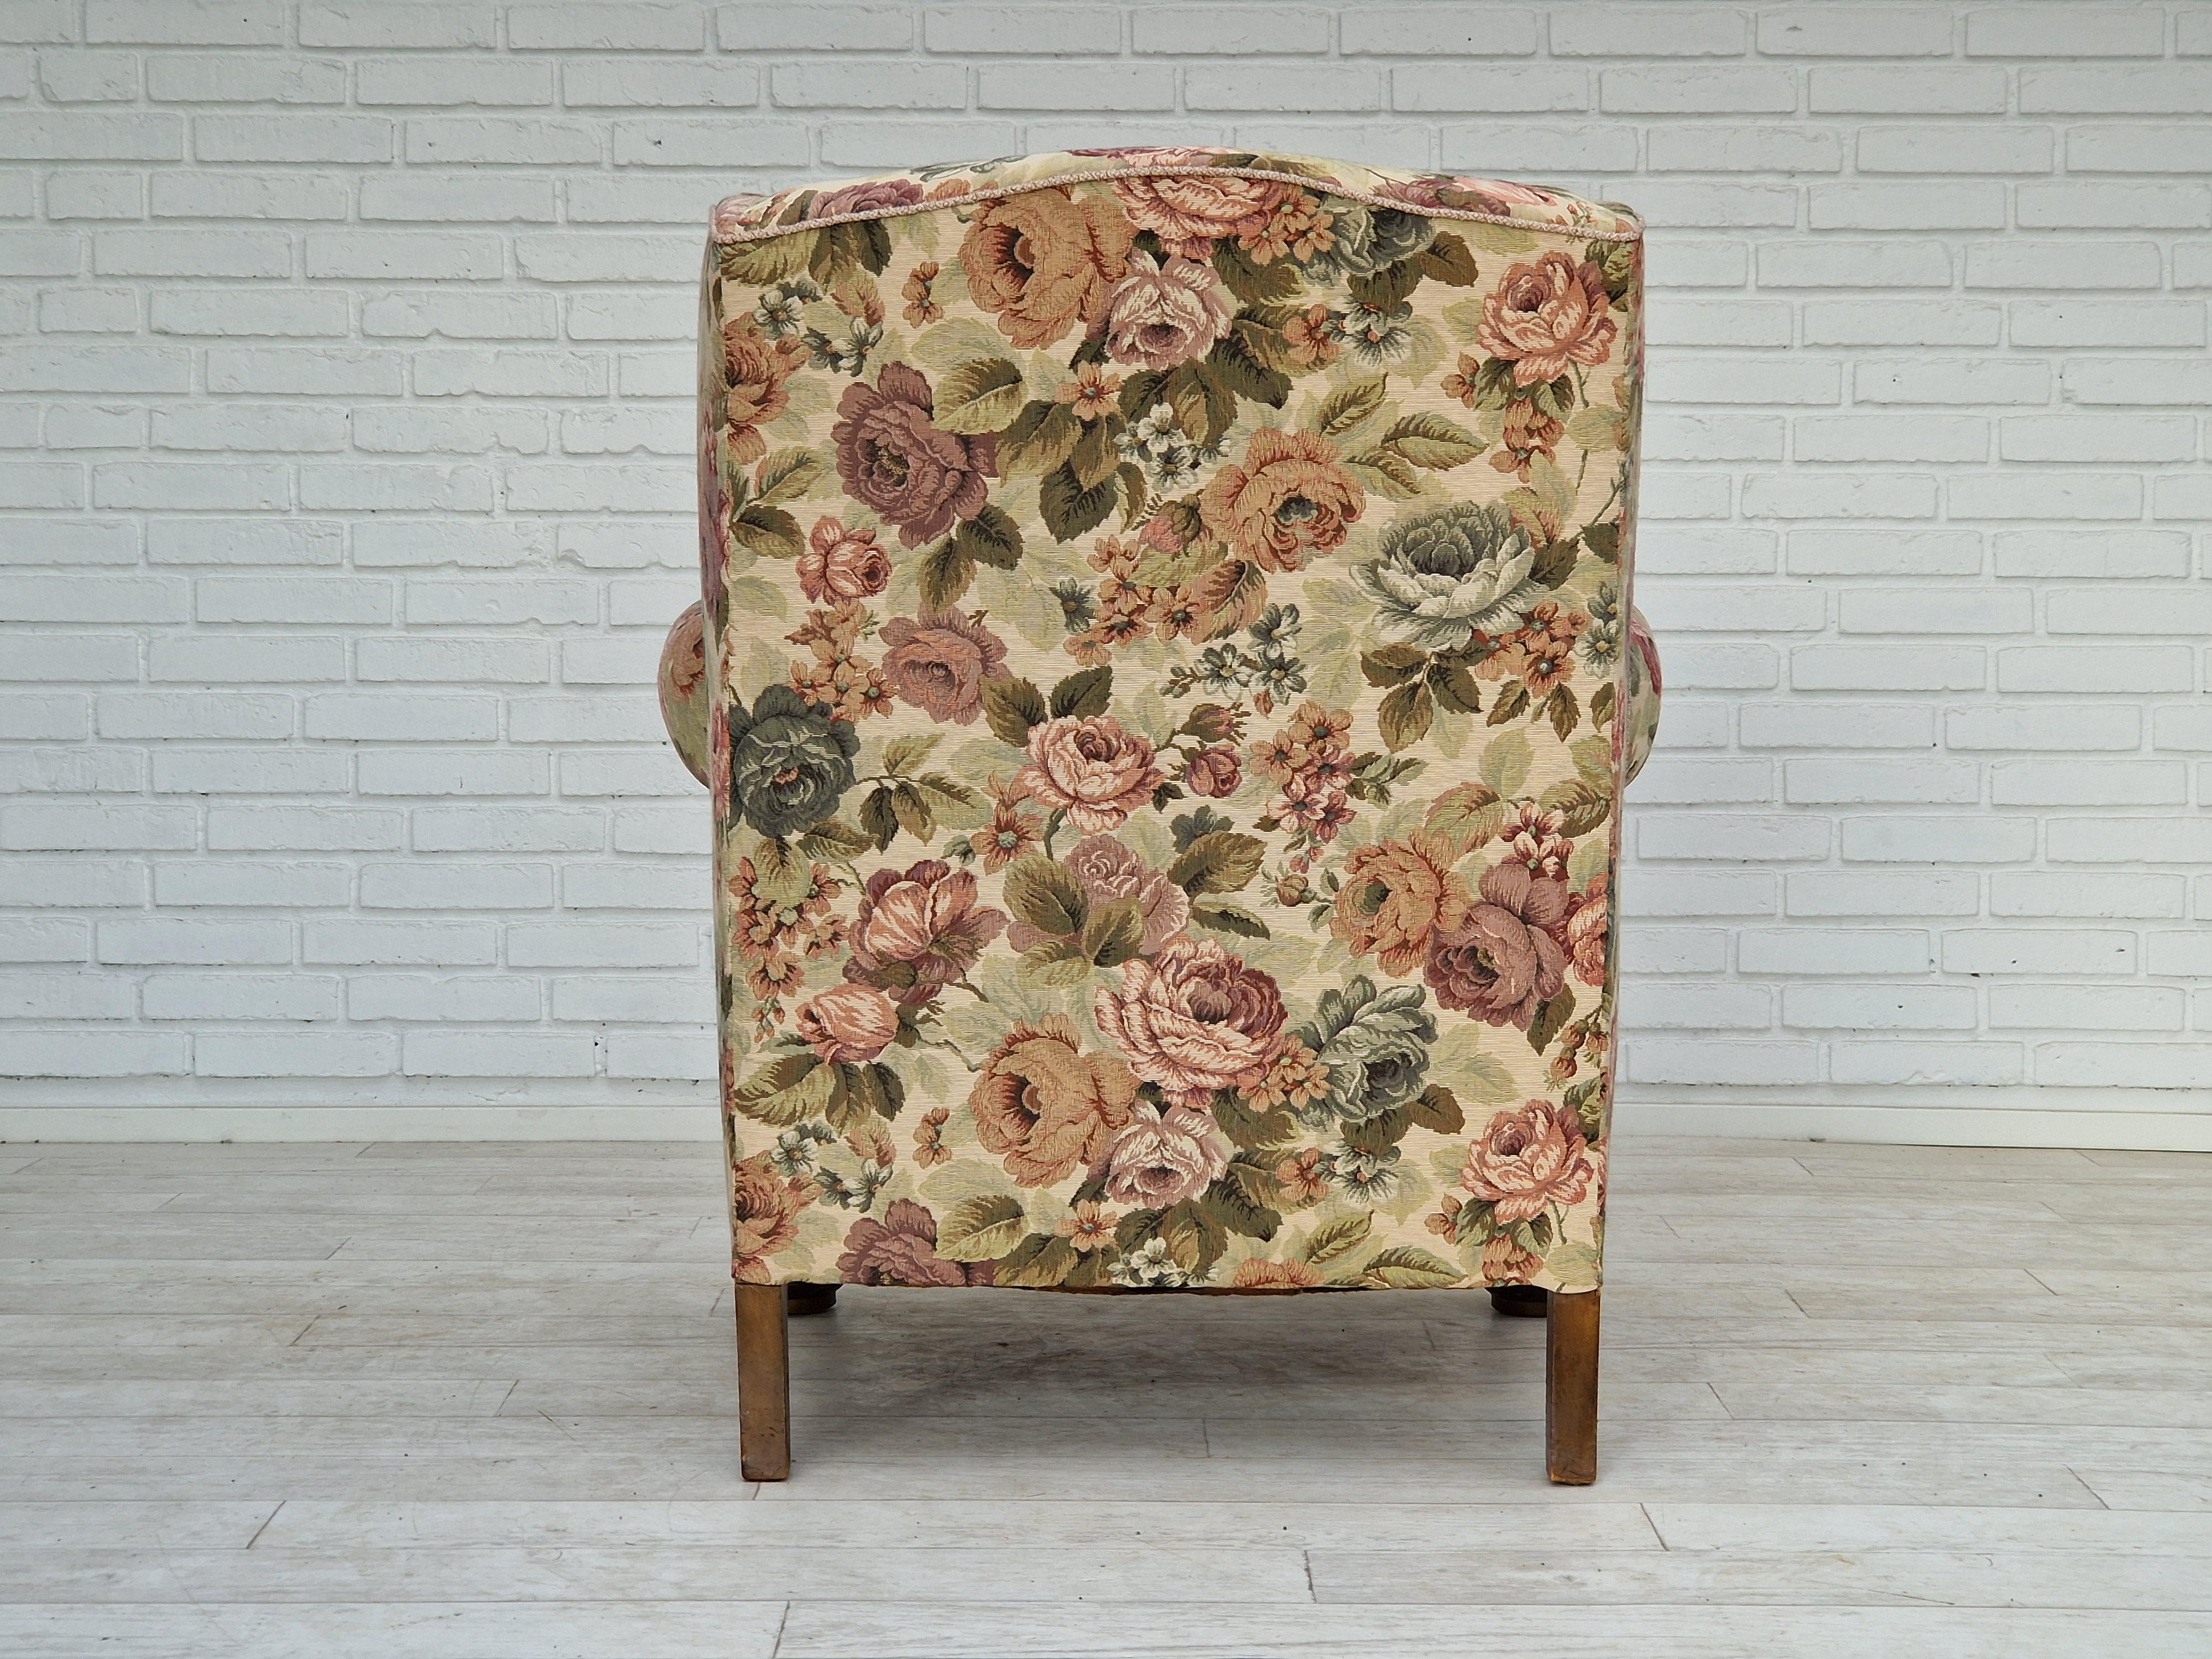 1950s, Danish vintage relax chair in 